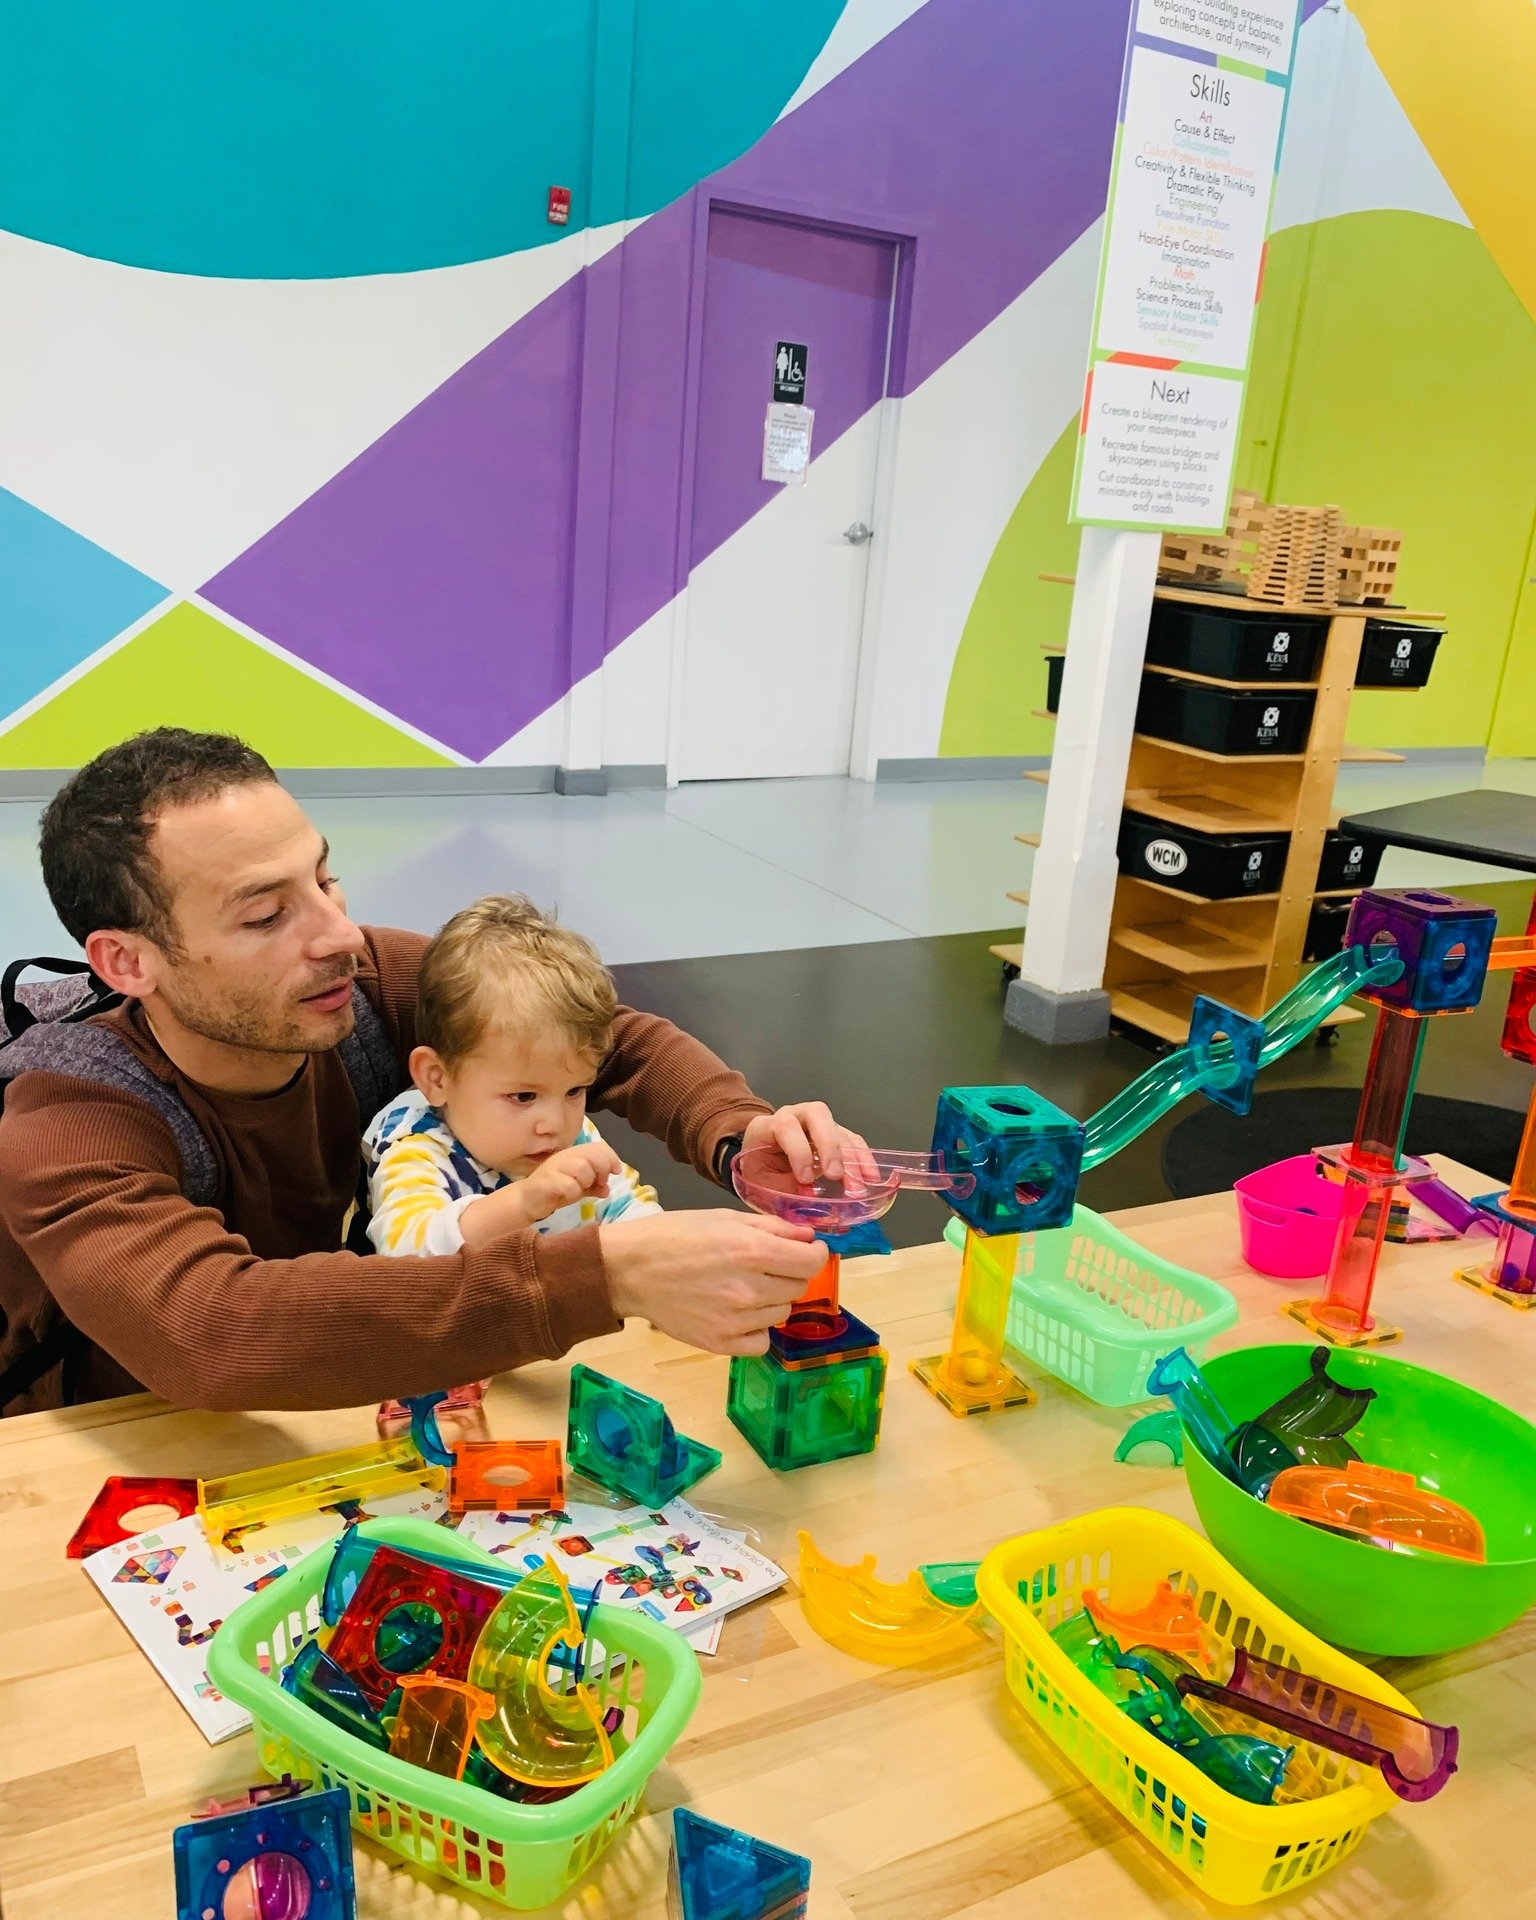 A full weekend of Maker activities, May 18 &amp; 19, 9am - 5pm!  Check out these sneak peek pics of Magnetic Motion, Robo Menagerie, Cardboard Bridges, Kinetic Balance Sculptures, Math Marble Machines, and Hot Glue 101
✨
 #PlayToLearn #WestchesterAct